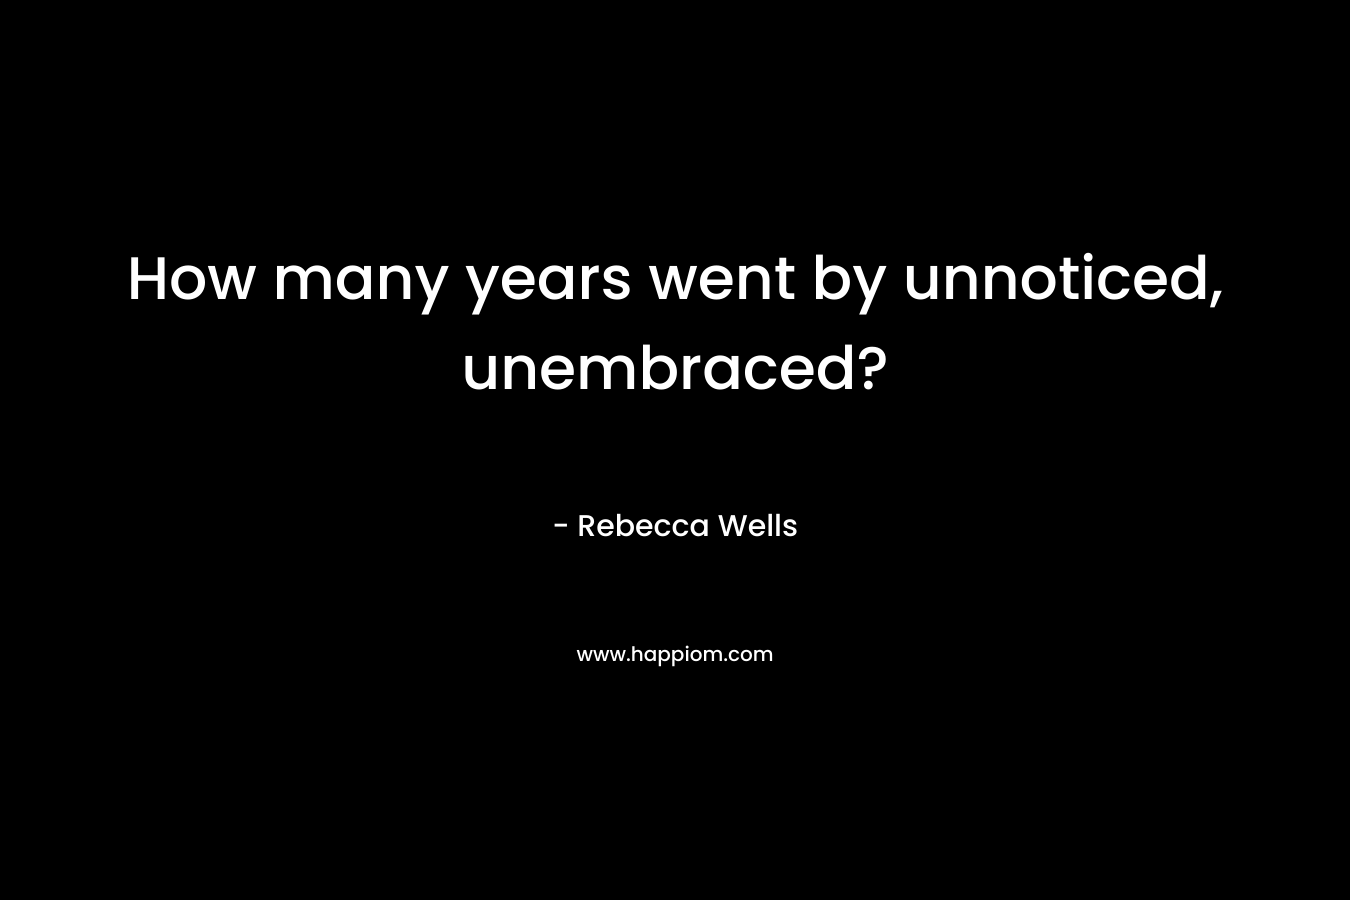 How many years went by unnoticed, unembraced?